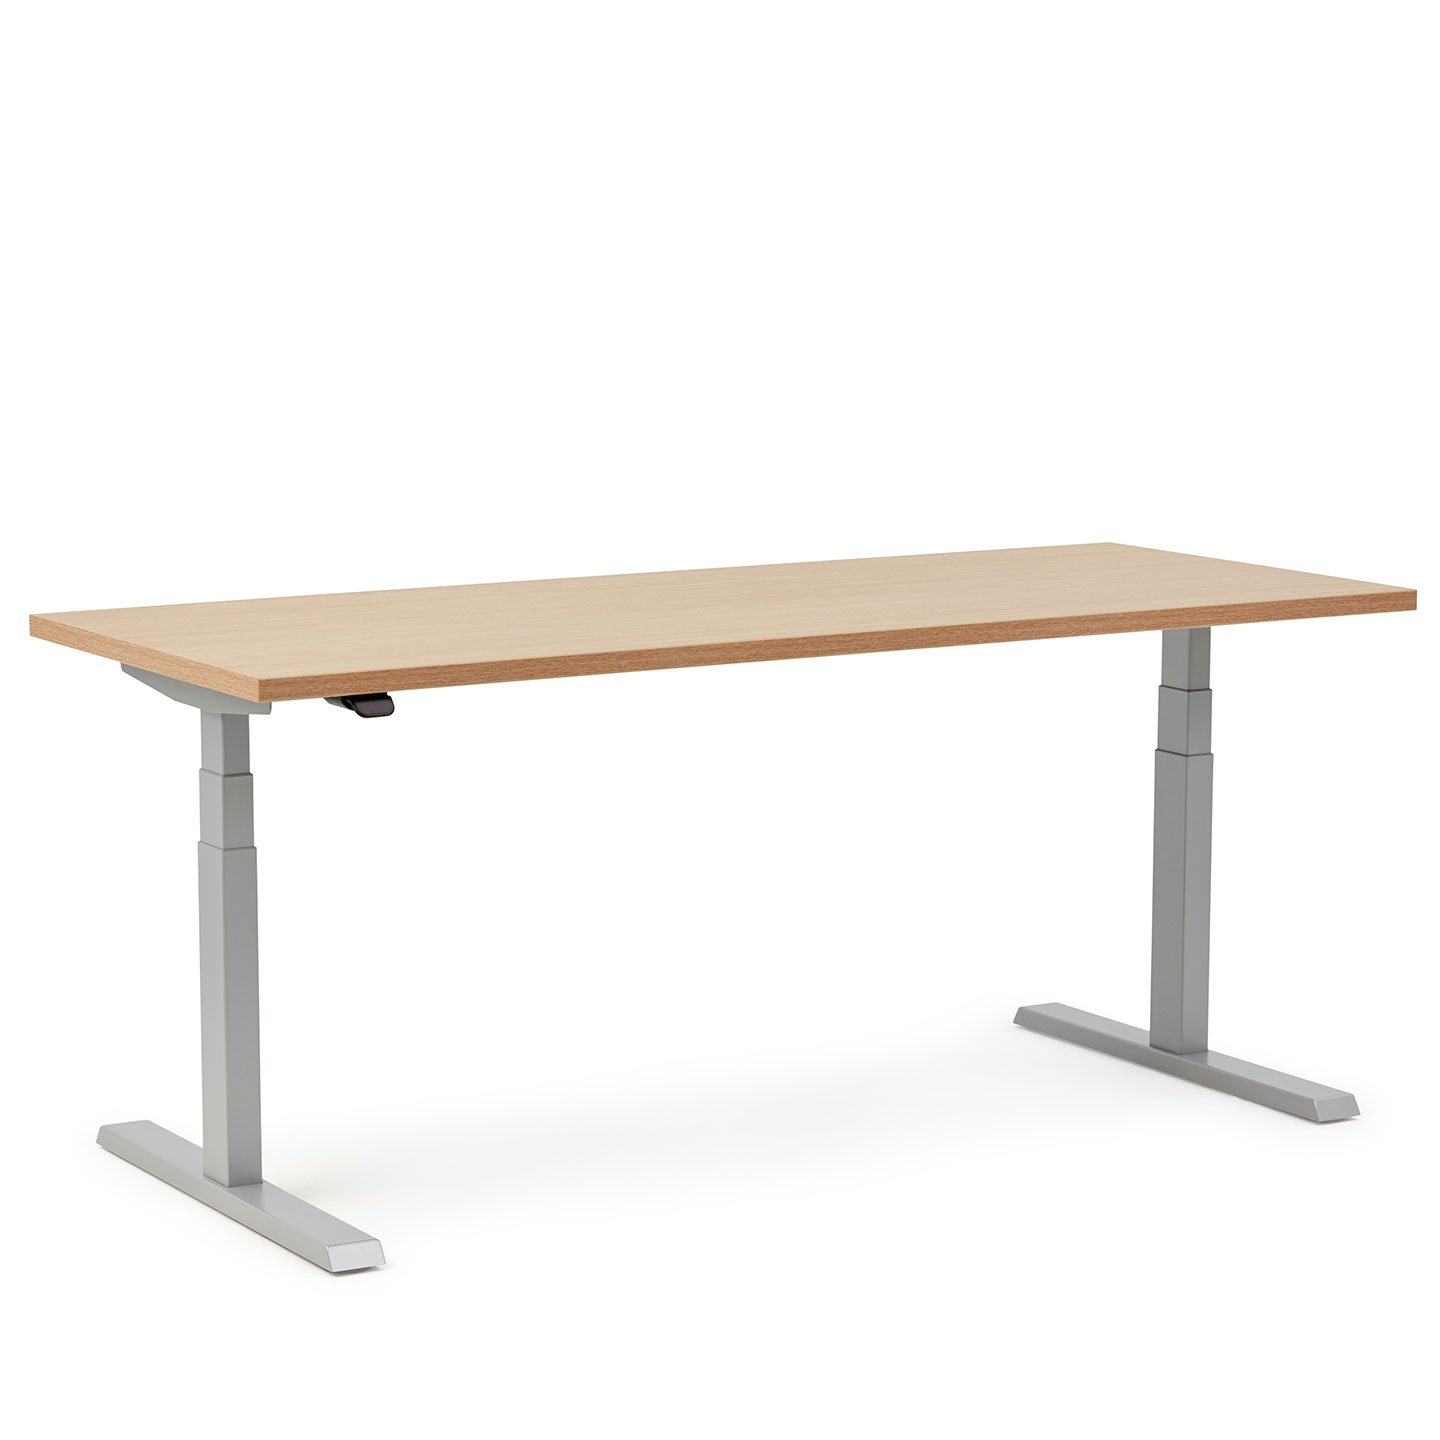 Haworth Upside Height Adjustable Table with maple rectangular top and steel legs